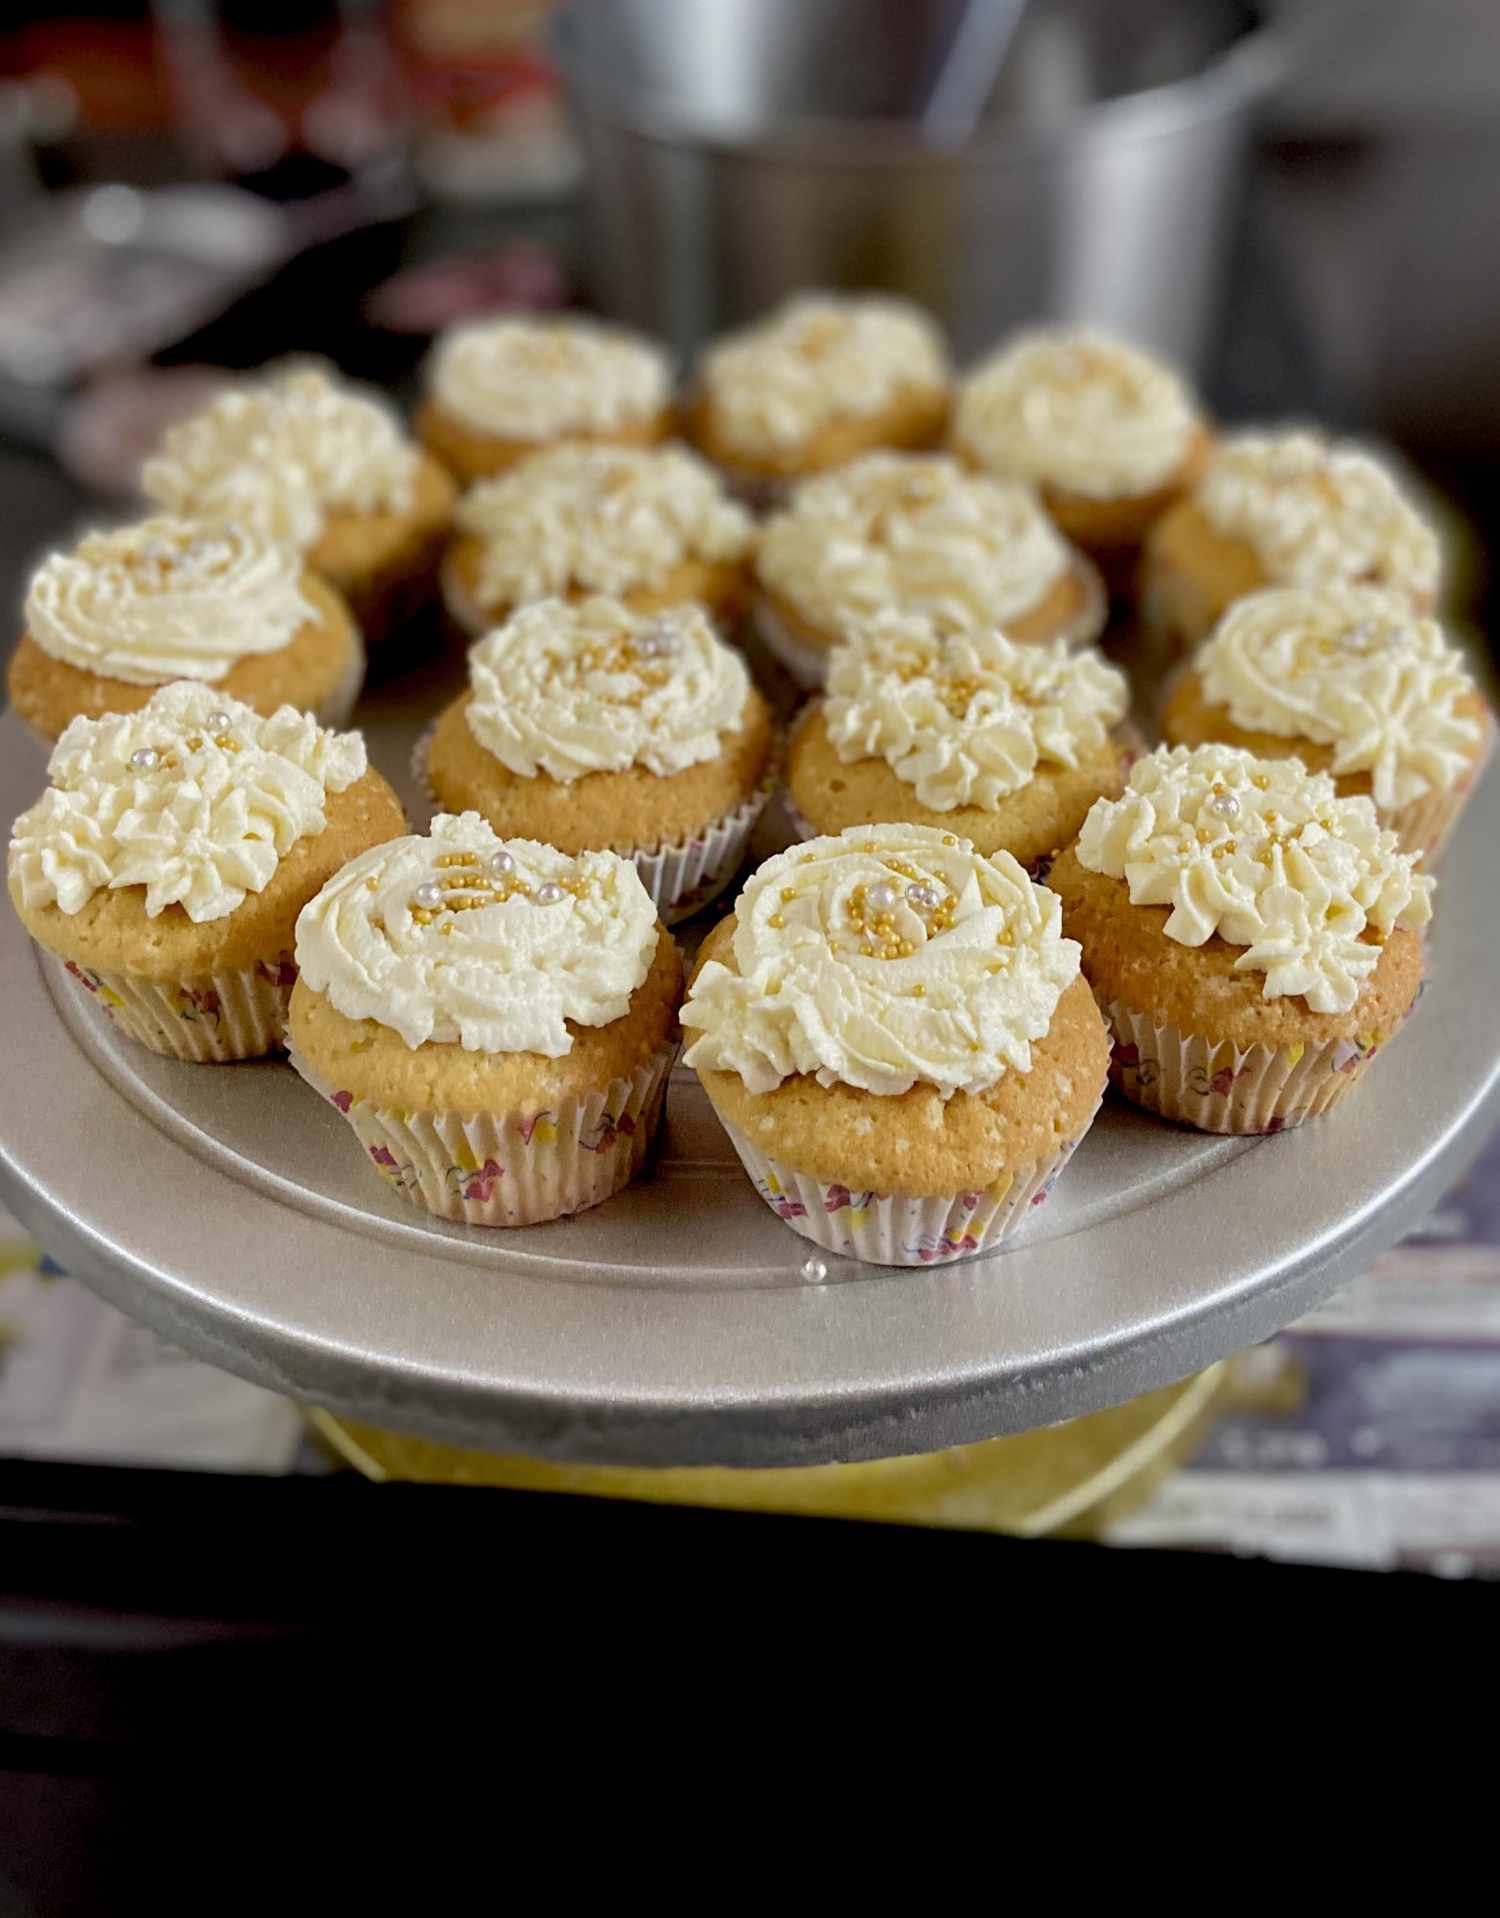 a plate holding 15 cupcakes with piped white frosting and gold sprinkles